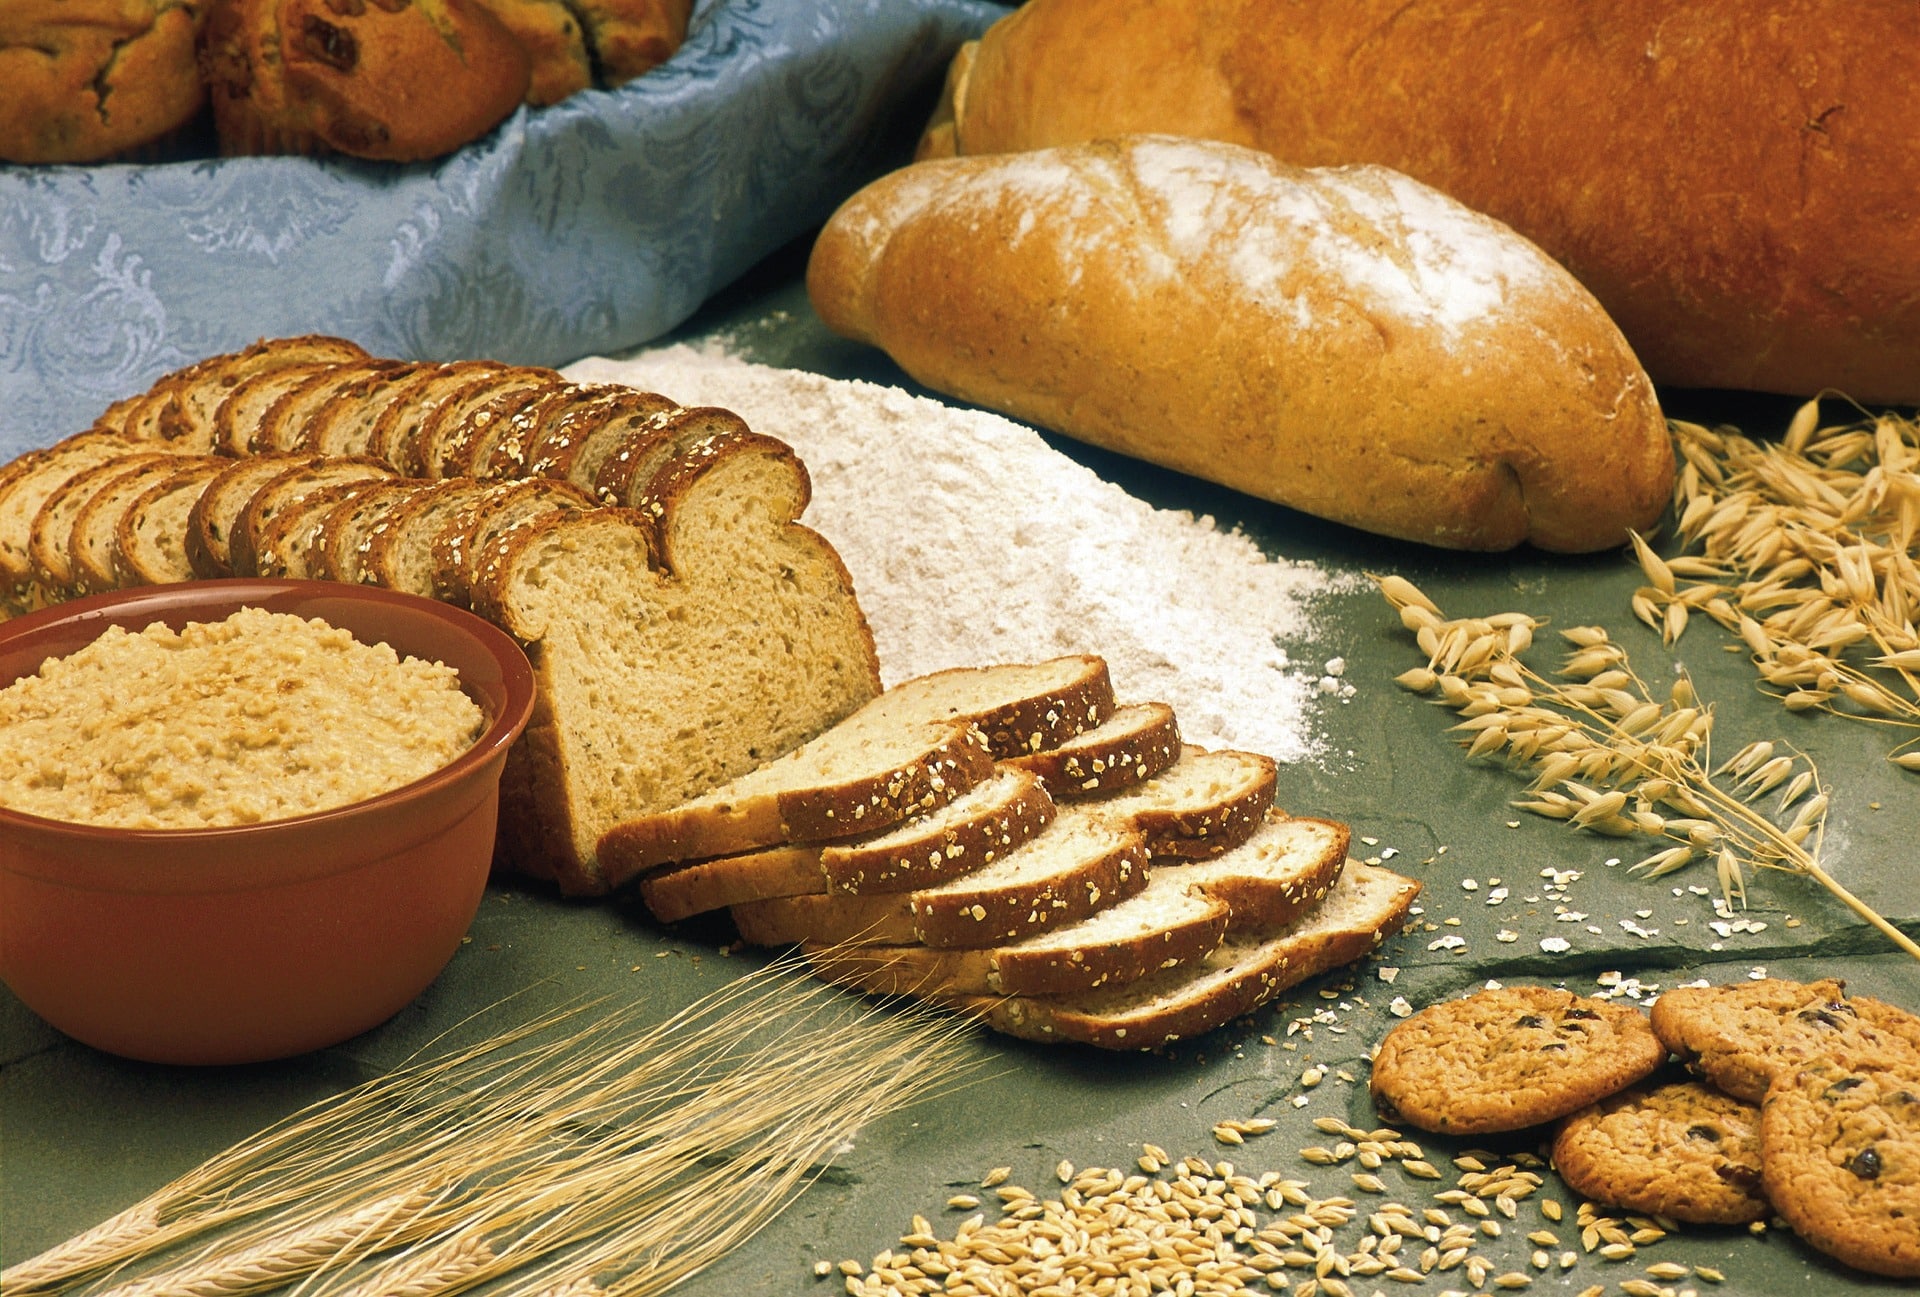 Carbohydrate Diets in Clinical Nutritional Practice